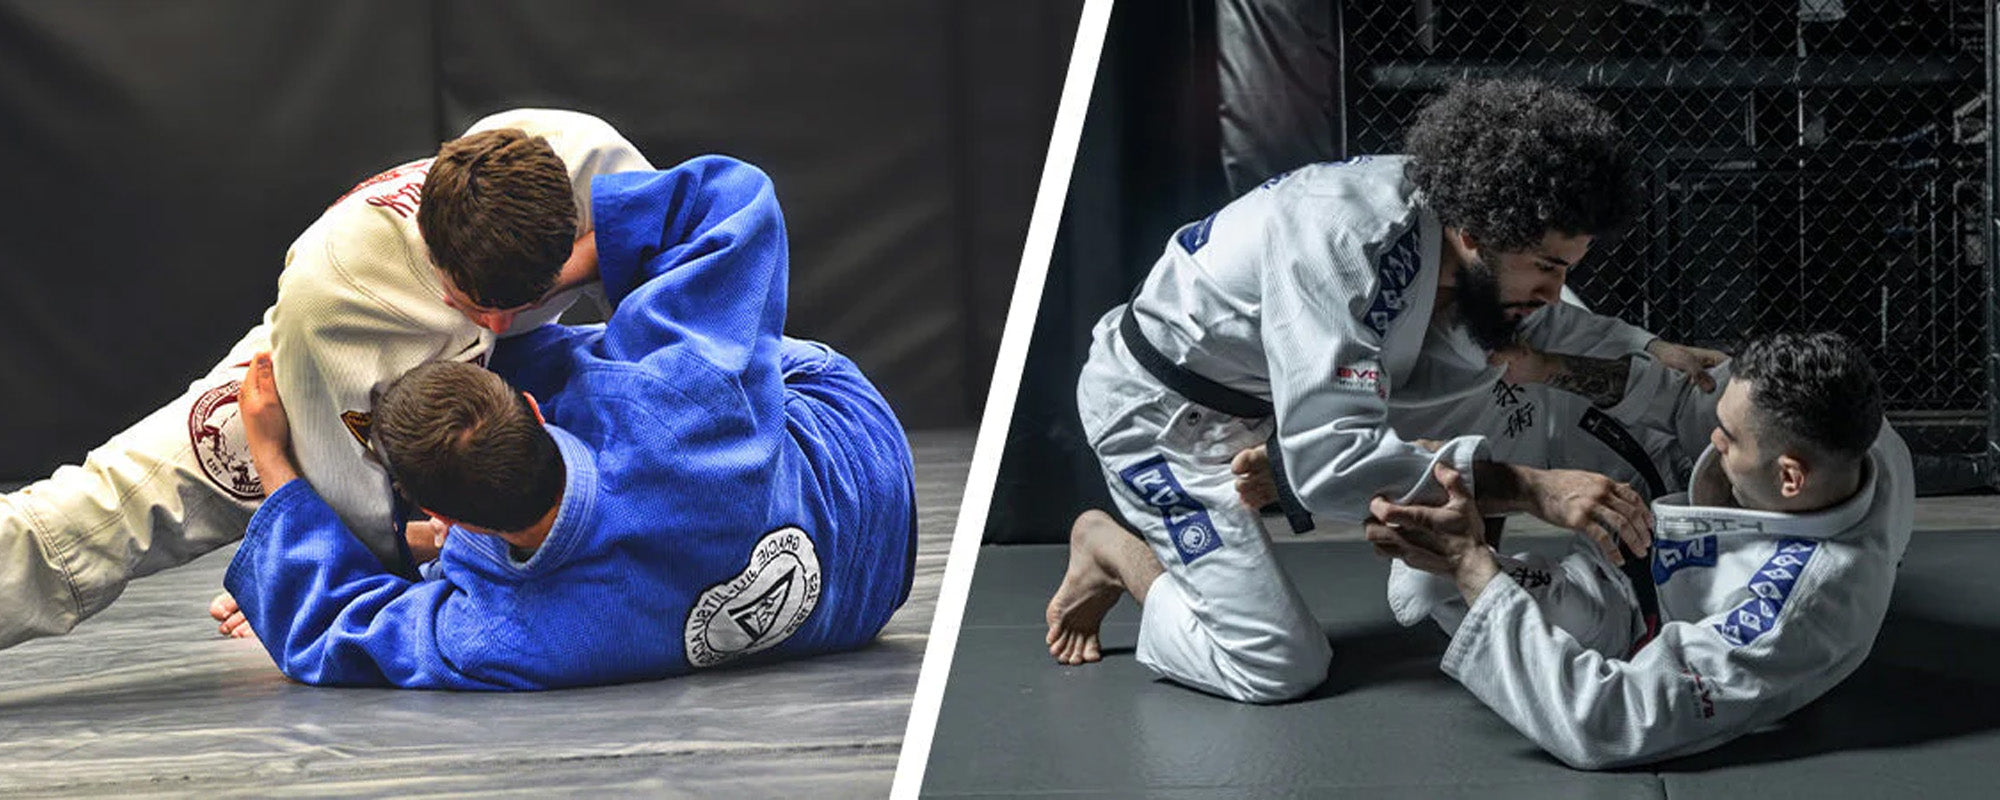 GJJ vs BJJ - What's the Difference and Similarities